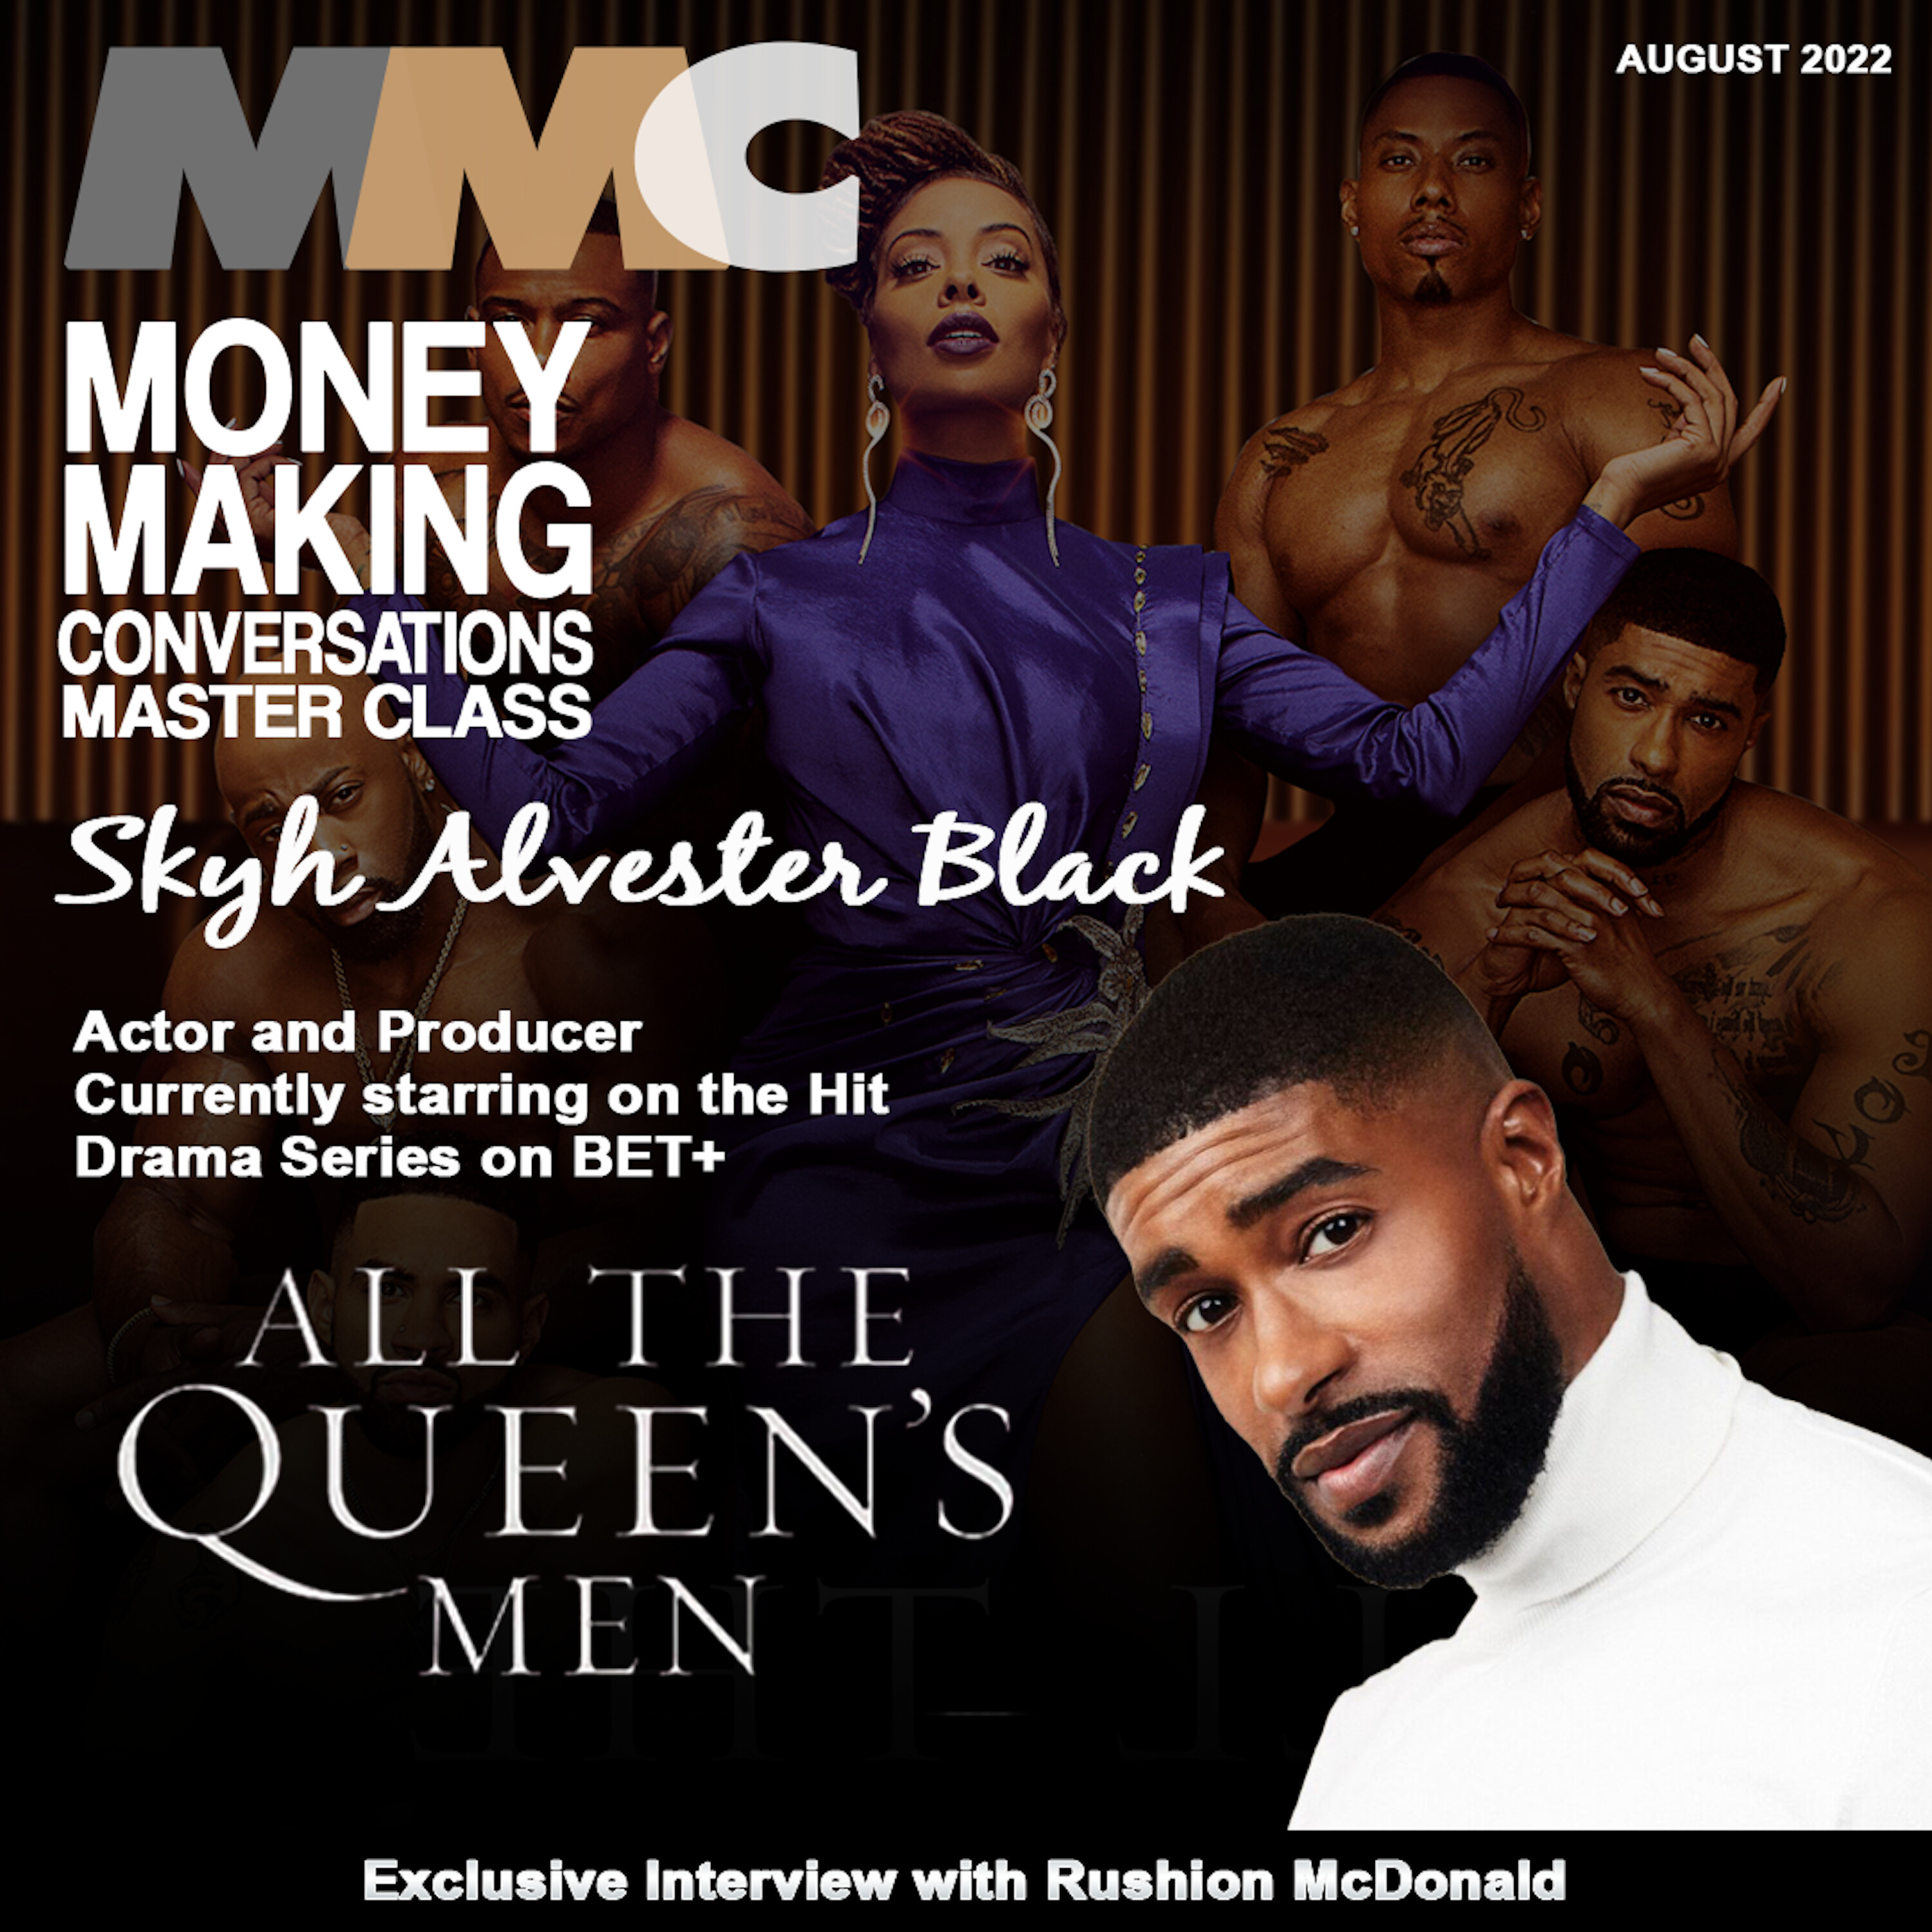 Rushion Interviews "All The Queen's Men" star Skyh Alvester Black talks season 2, homelessness, and working with Tyler Perry!